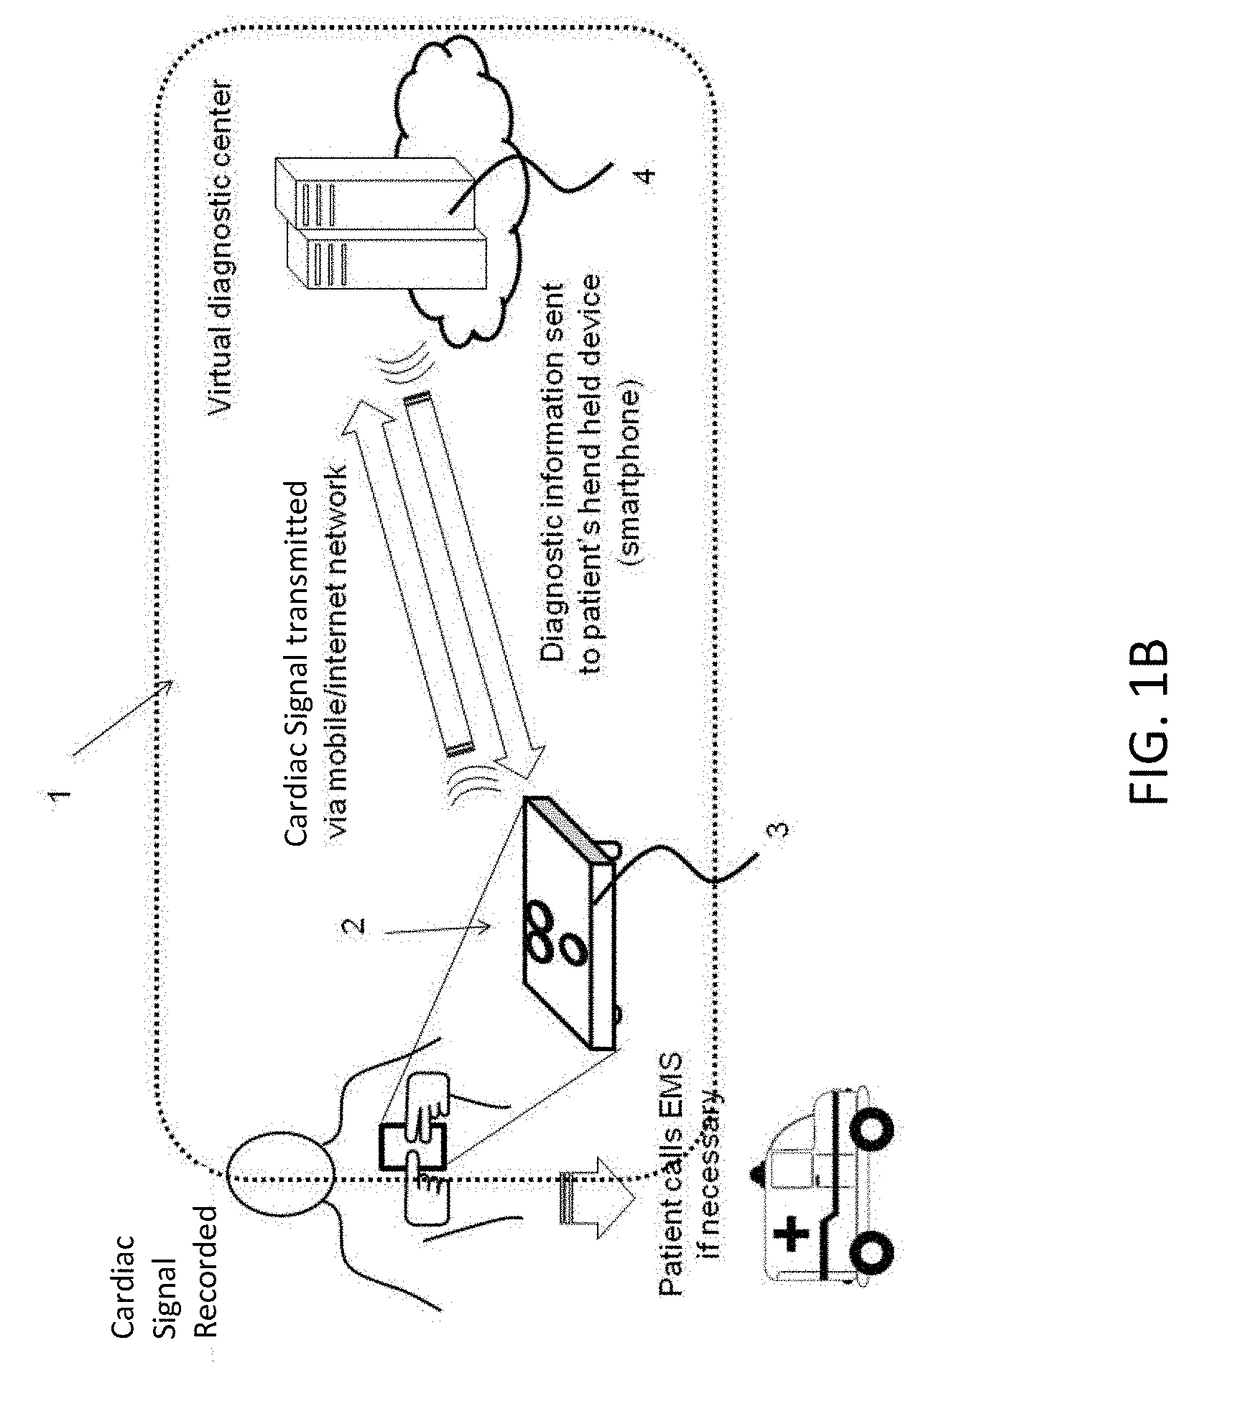 Mobile three-lead cardiac monitoring device and method for automated diagnostics